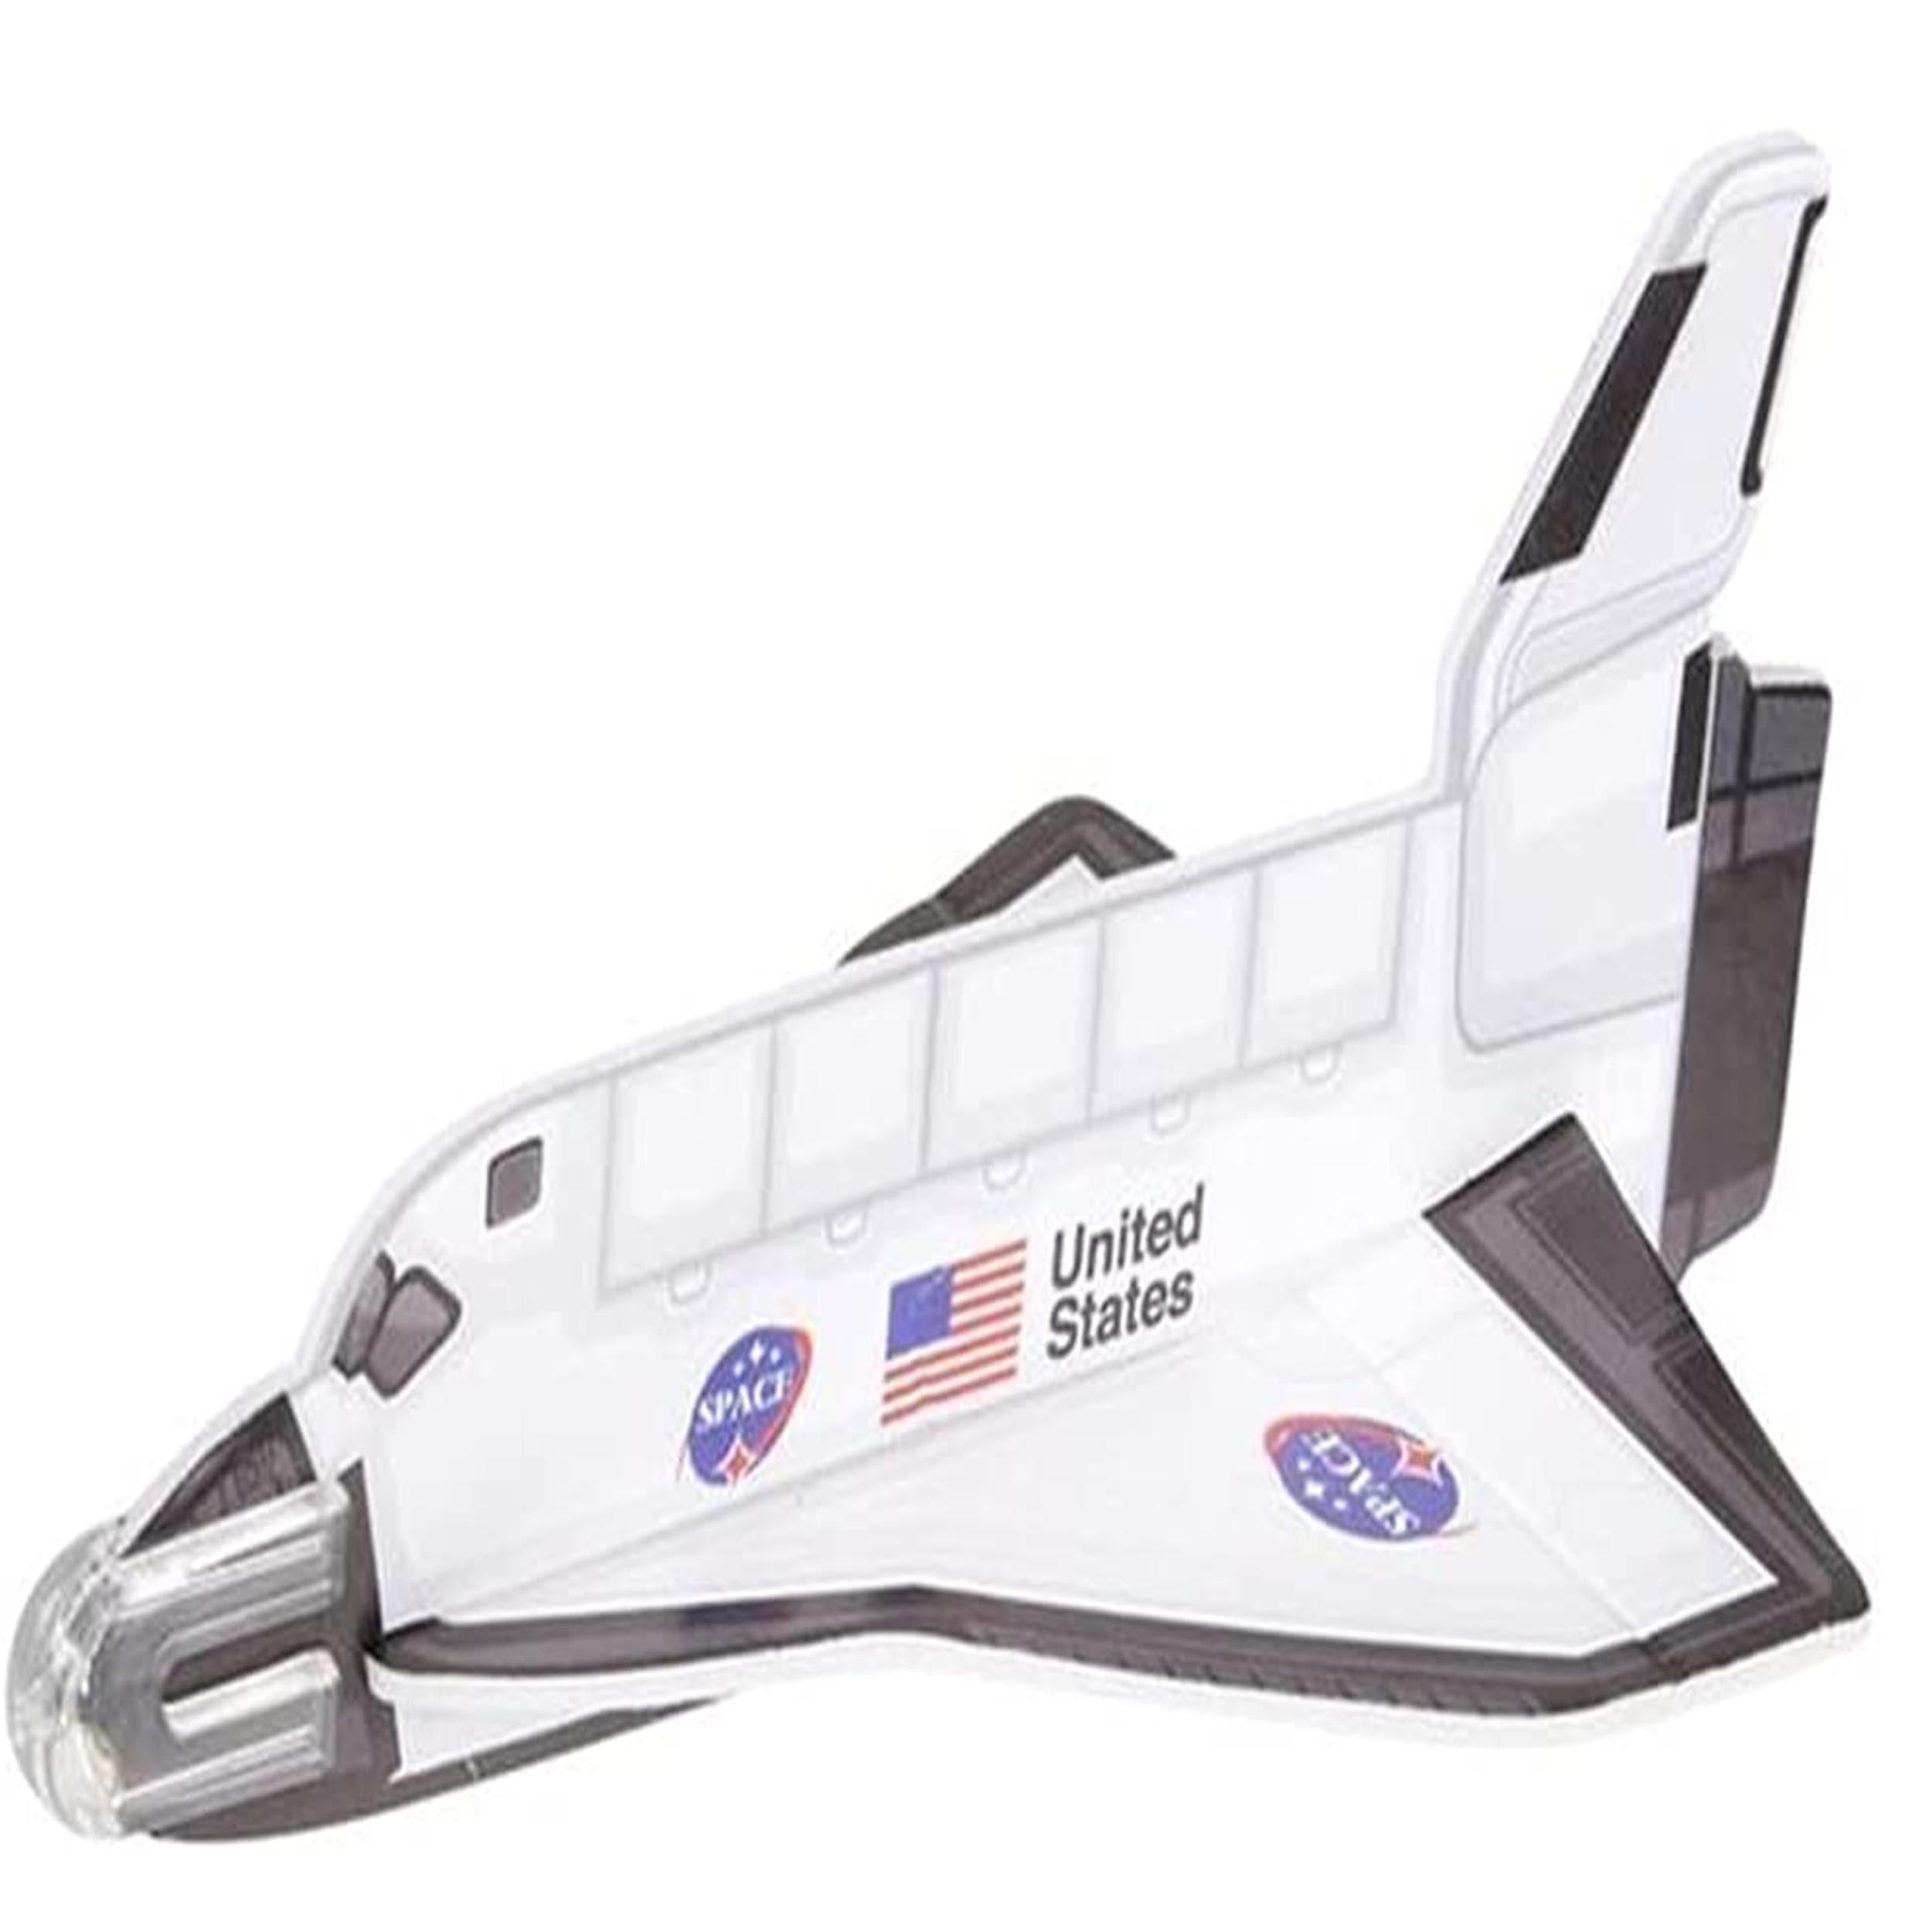 Space Shuttle Gliders ( 24 pieces=$19.99)